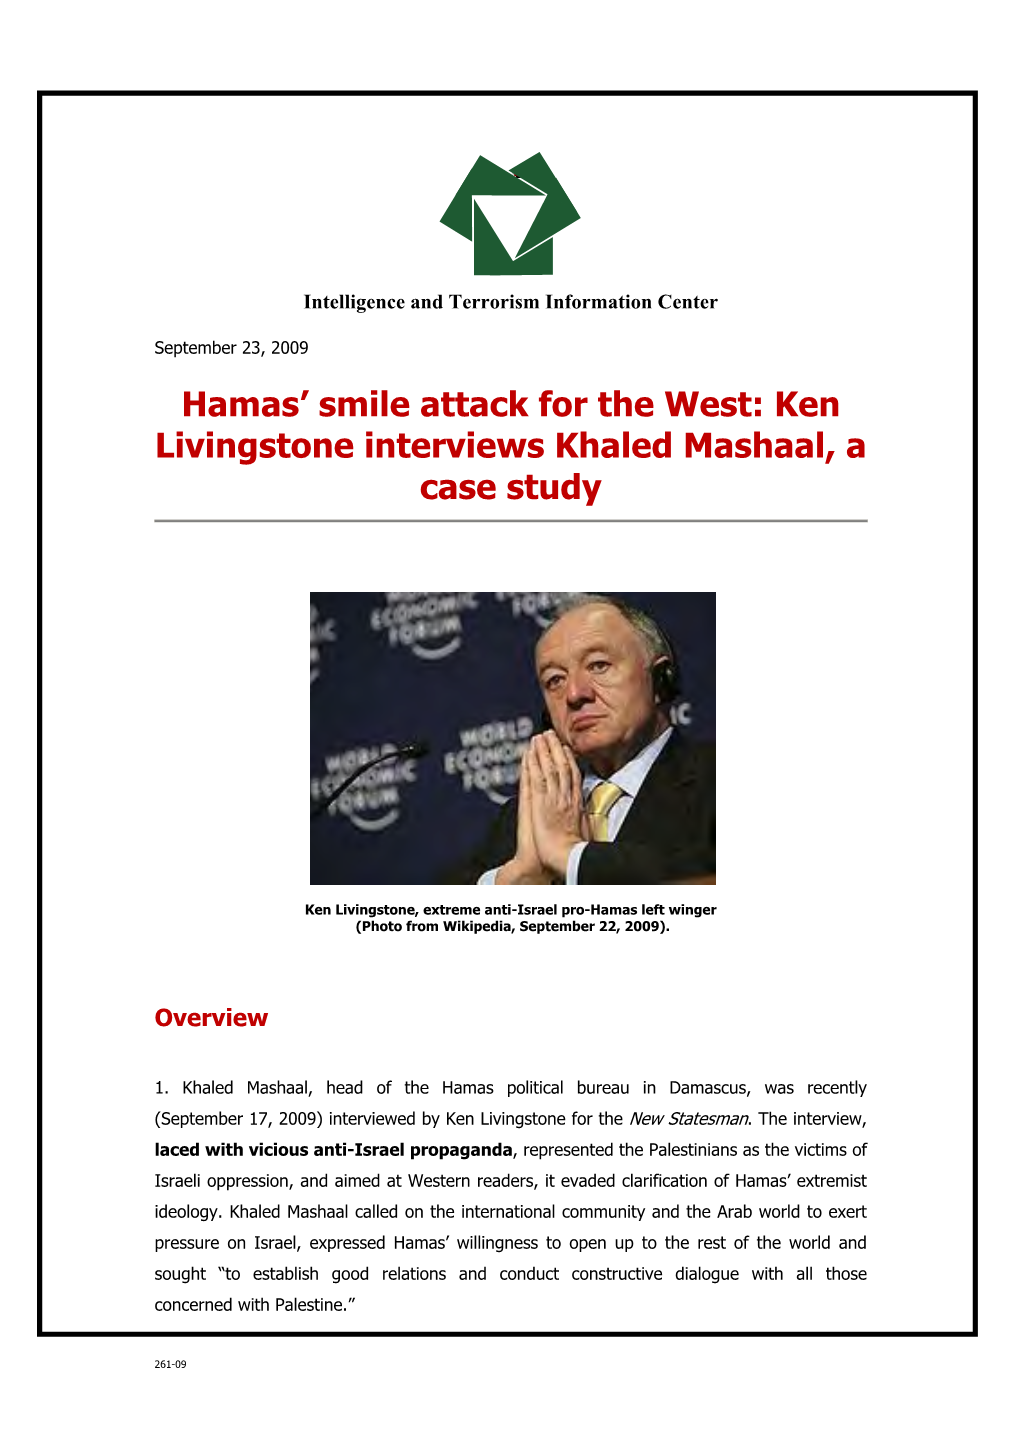 Hamas' Smile Attack for the West